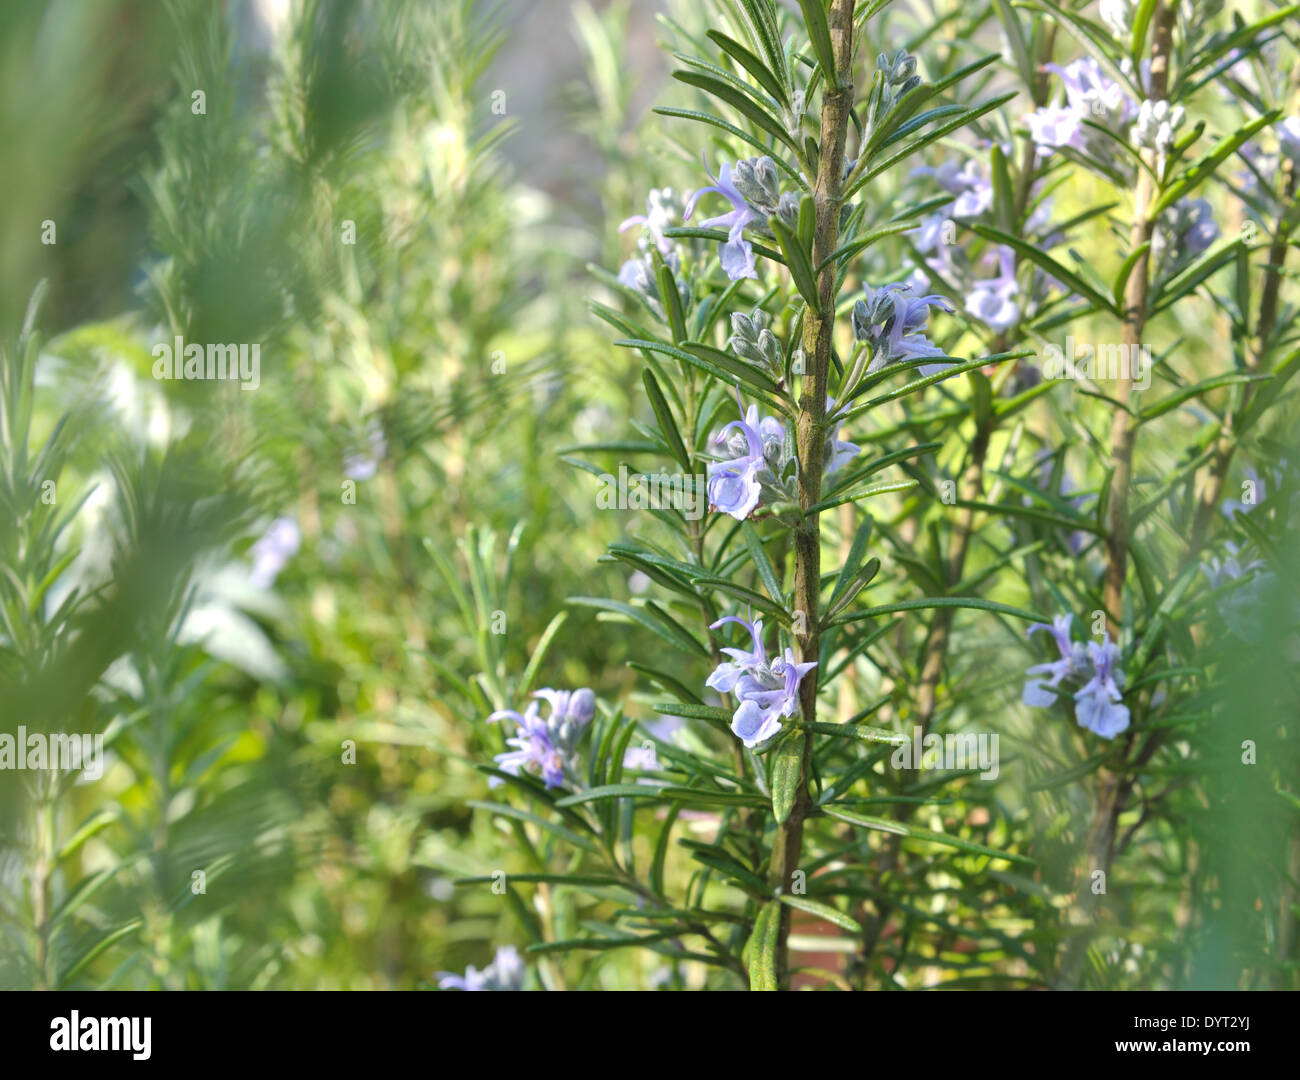 closeup view of a small purple rosemary flowers in a garden Stock Photo